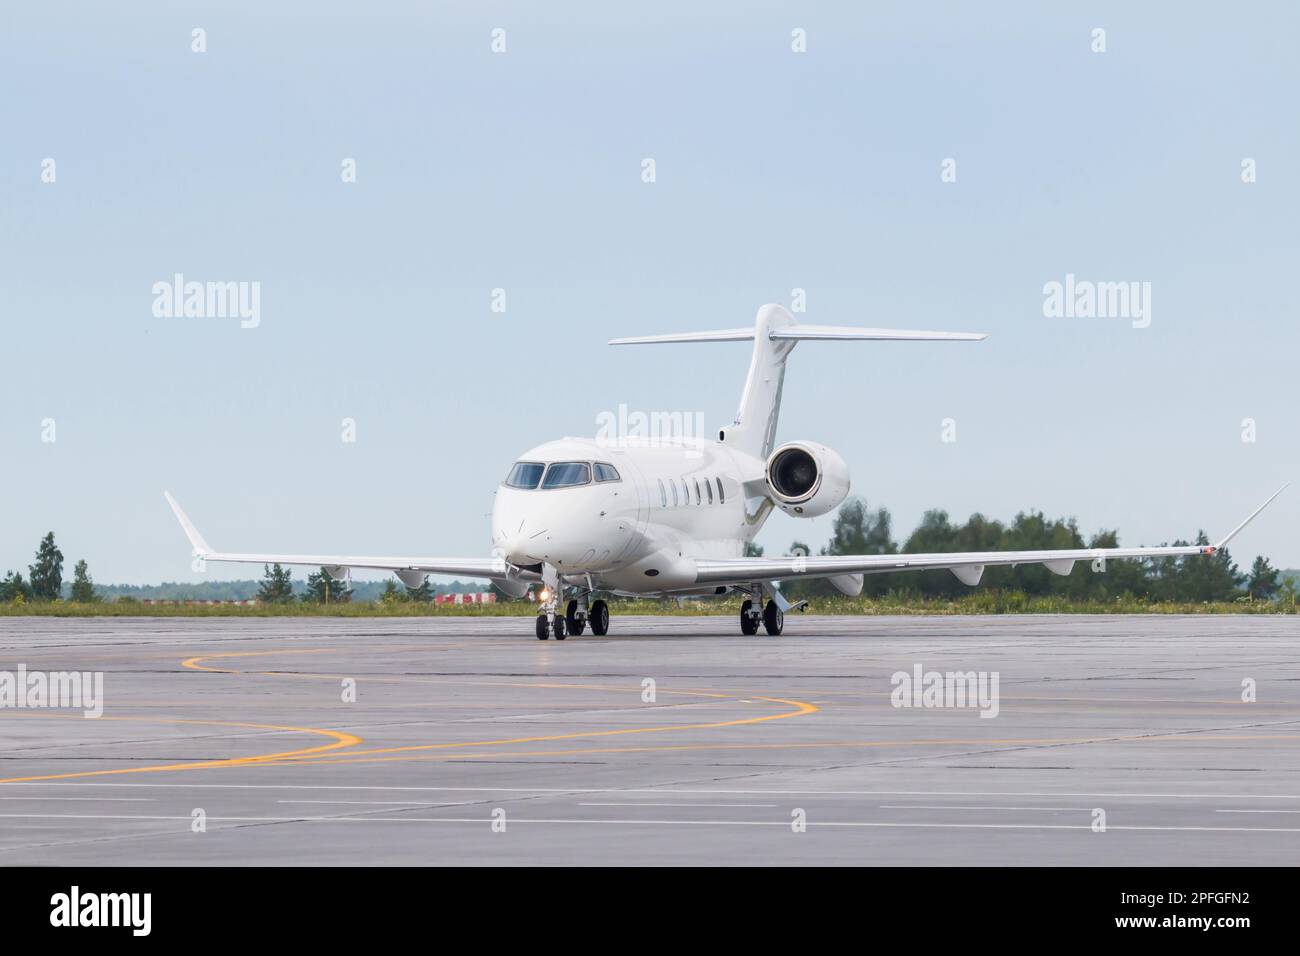 White luxury private jet taxiing on airport taxiway Stock Photo